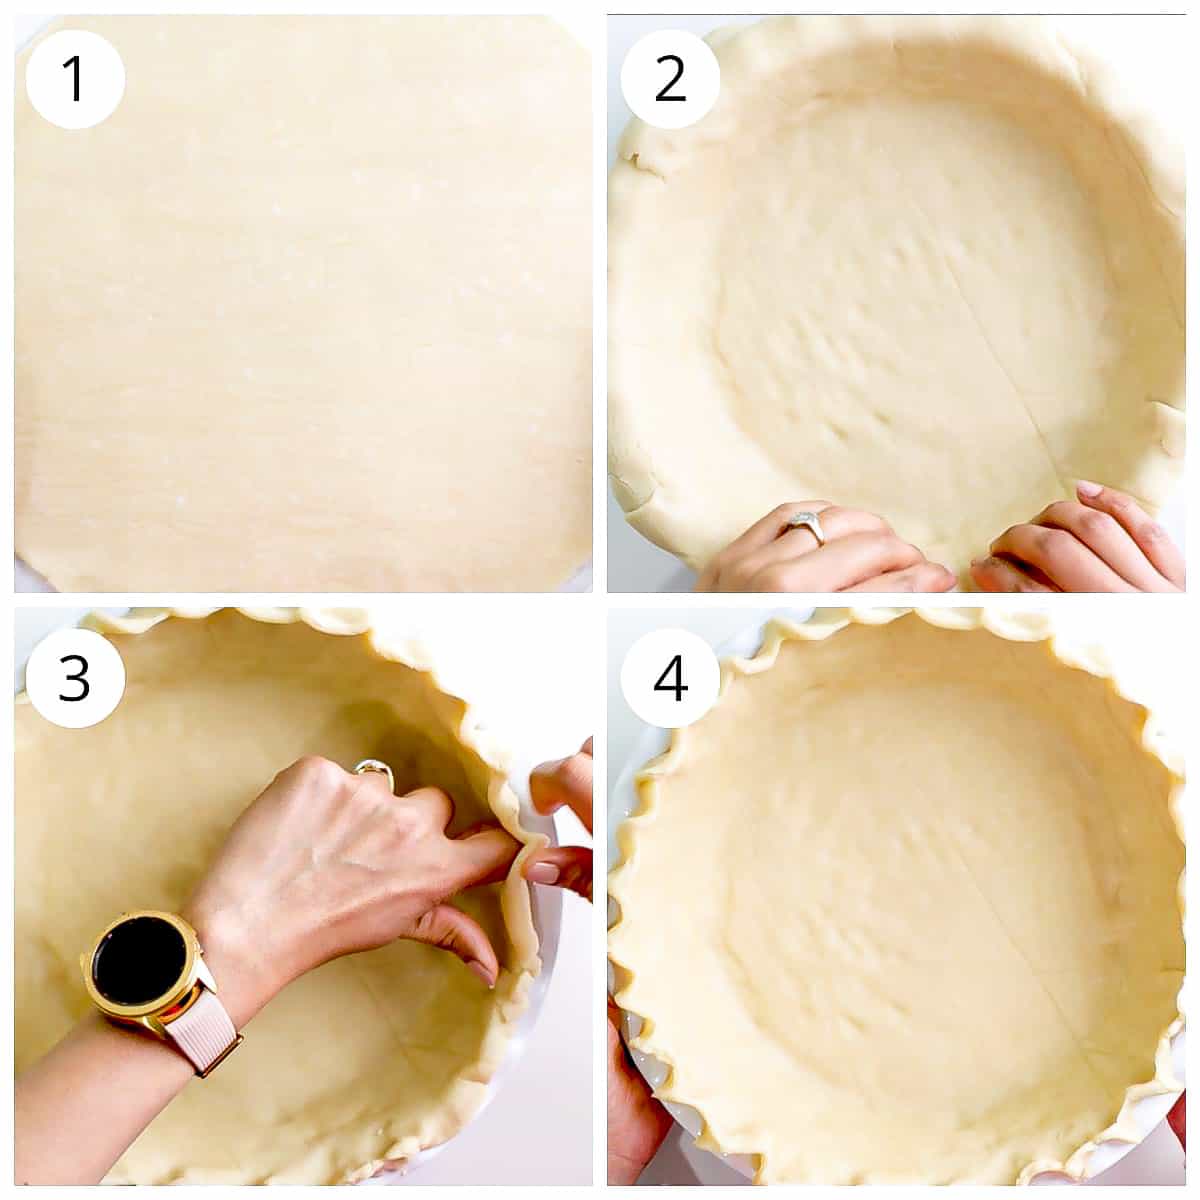 Steps for preparing the store bought pie crust.